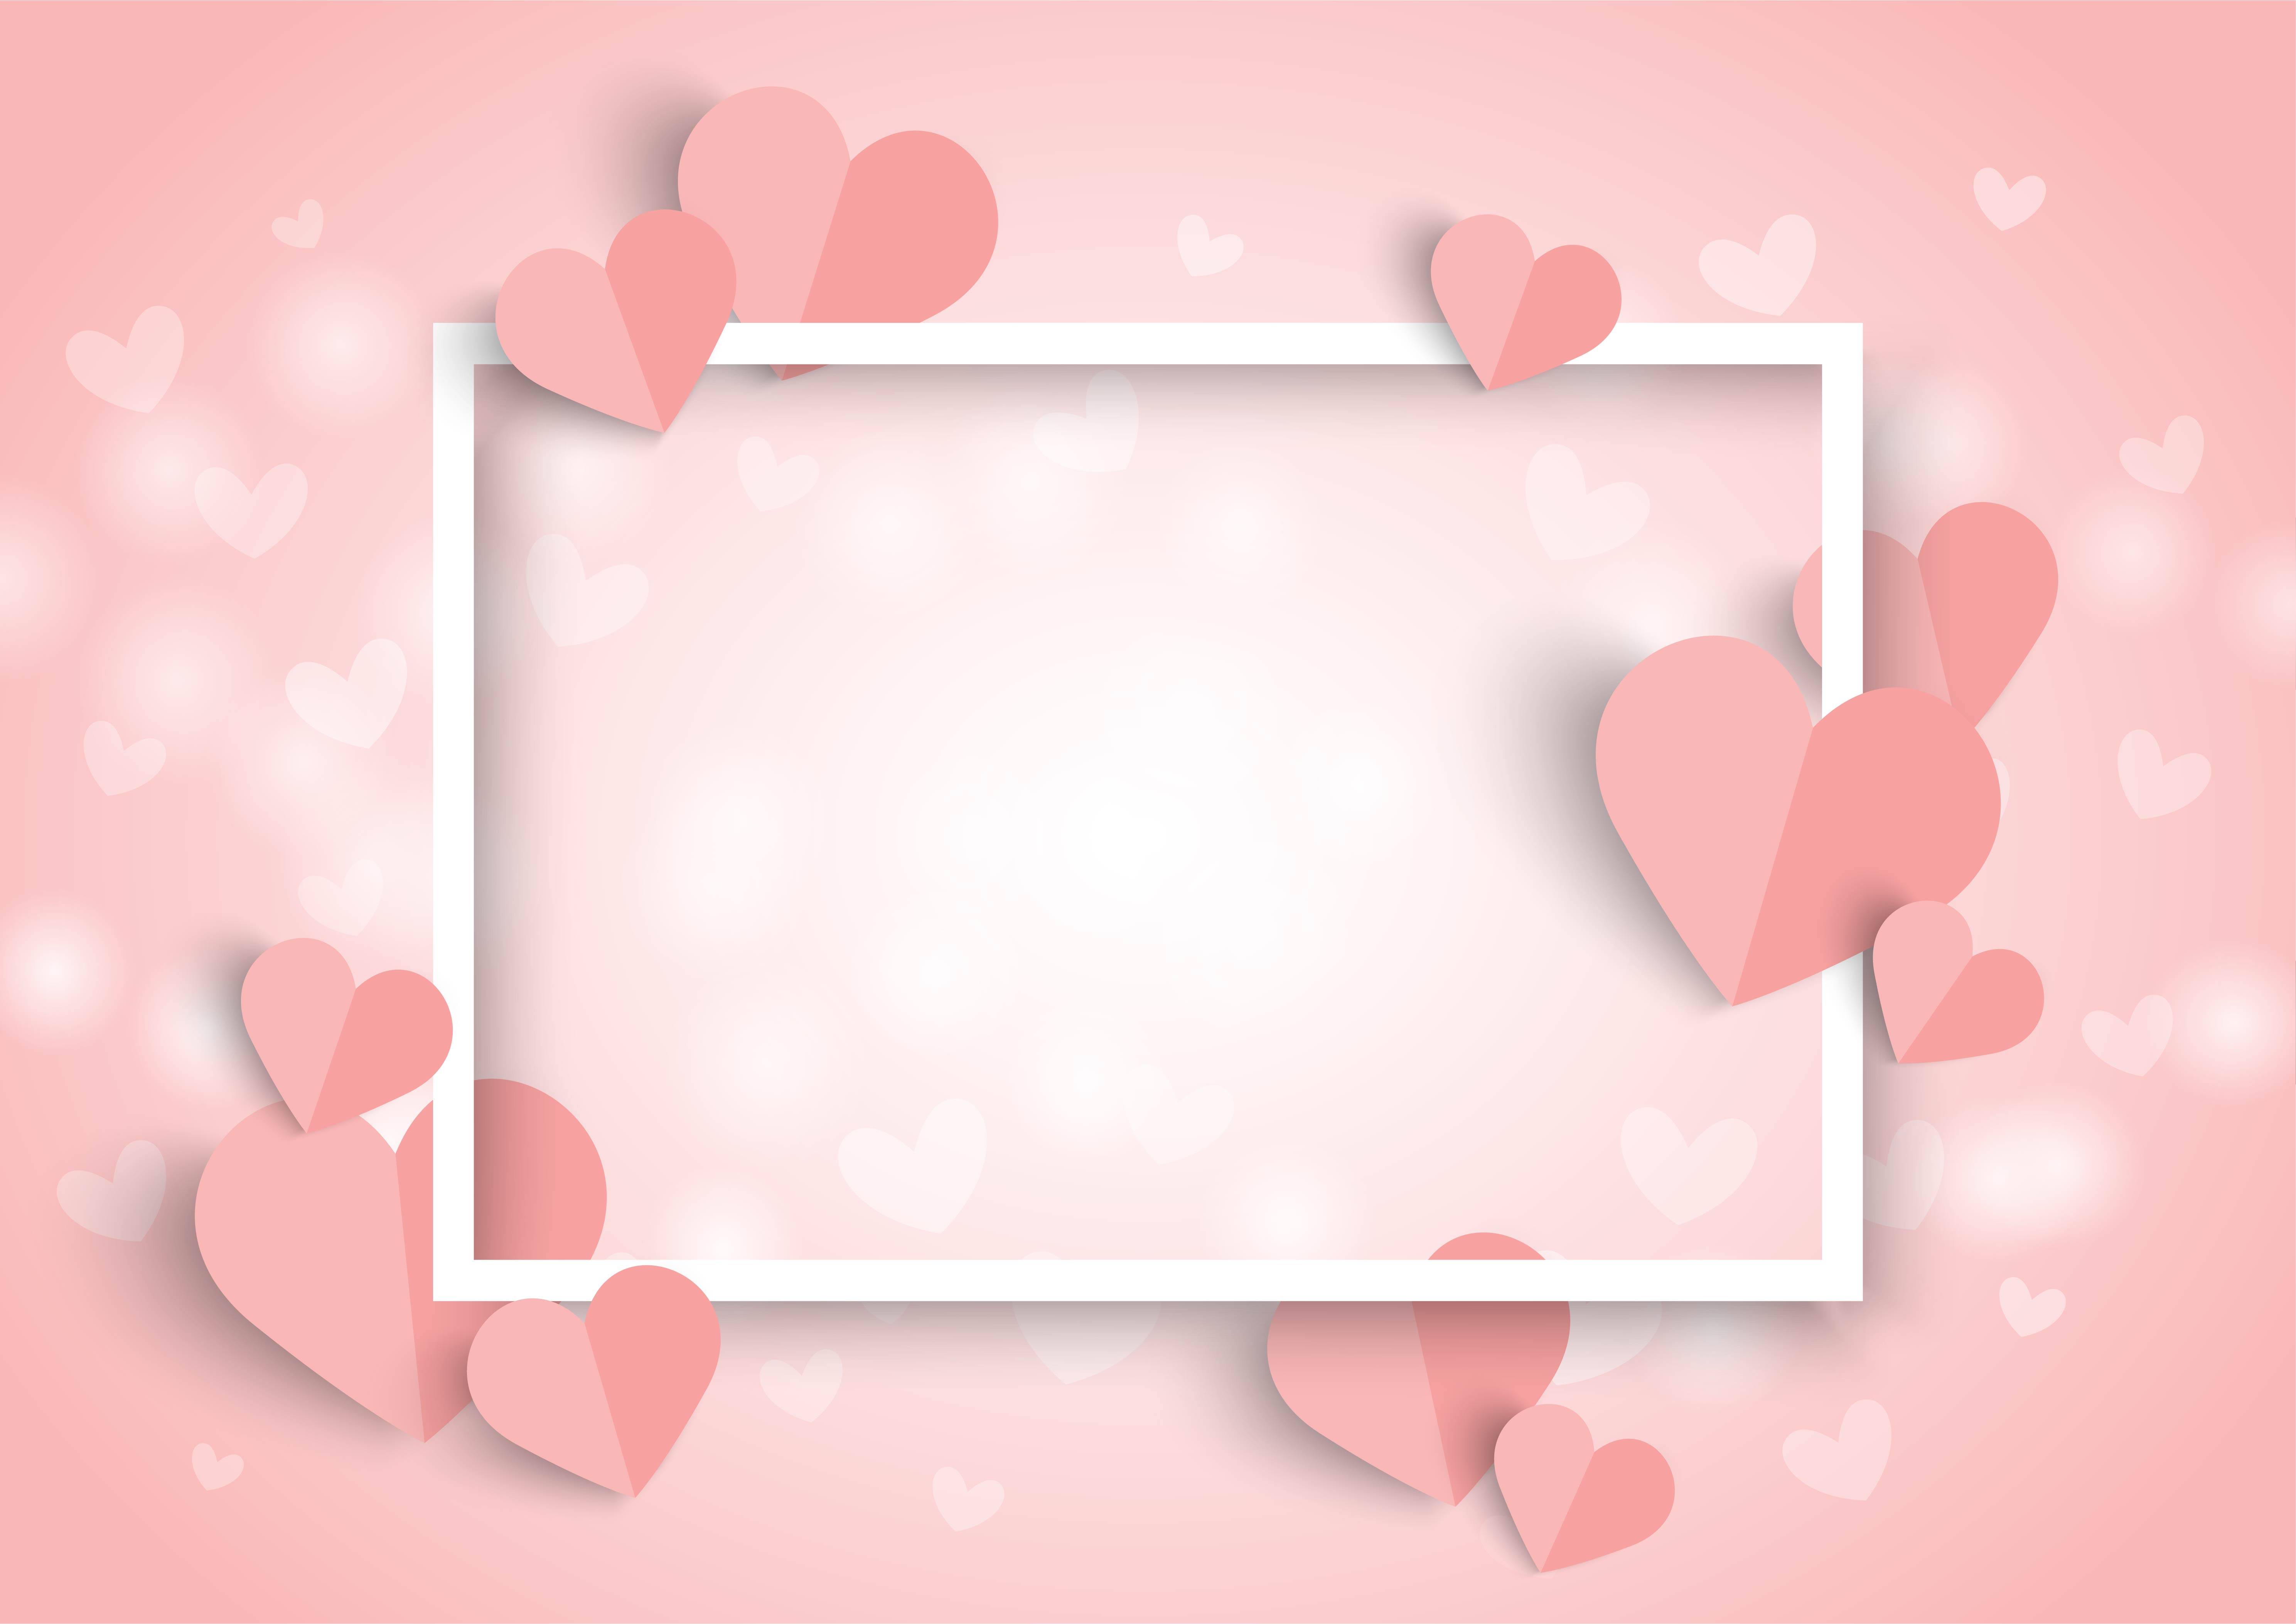 Valentines pink heart background, white frame and paper cut heart shape